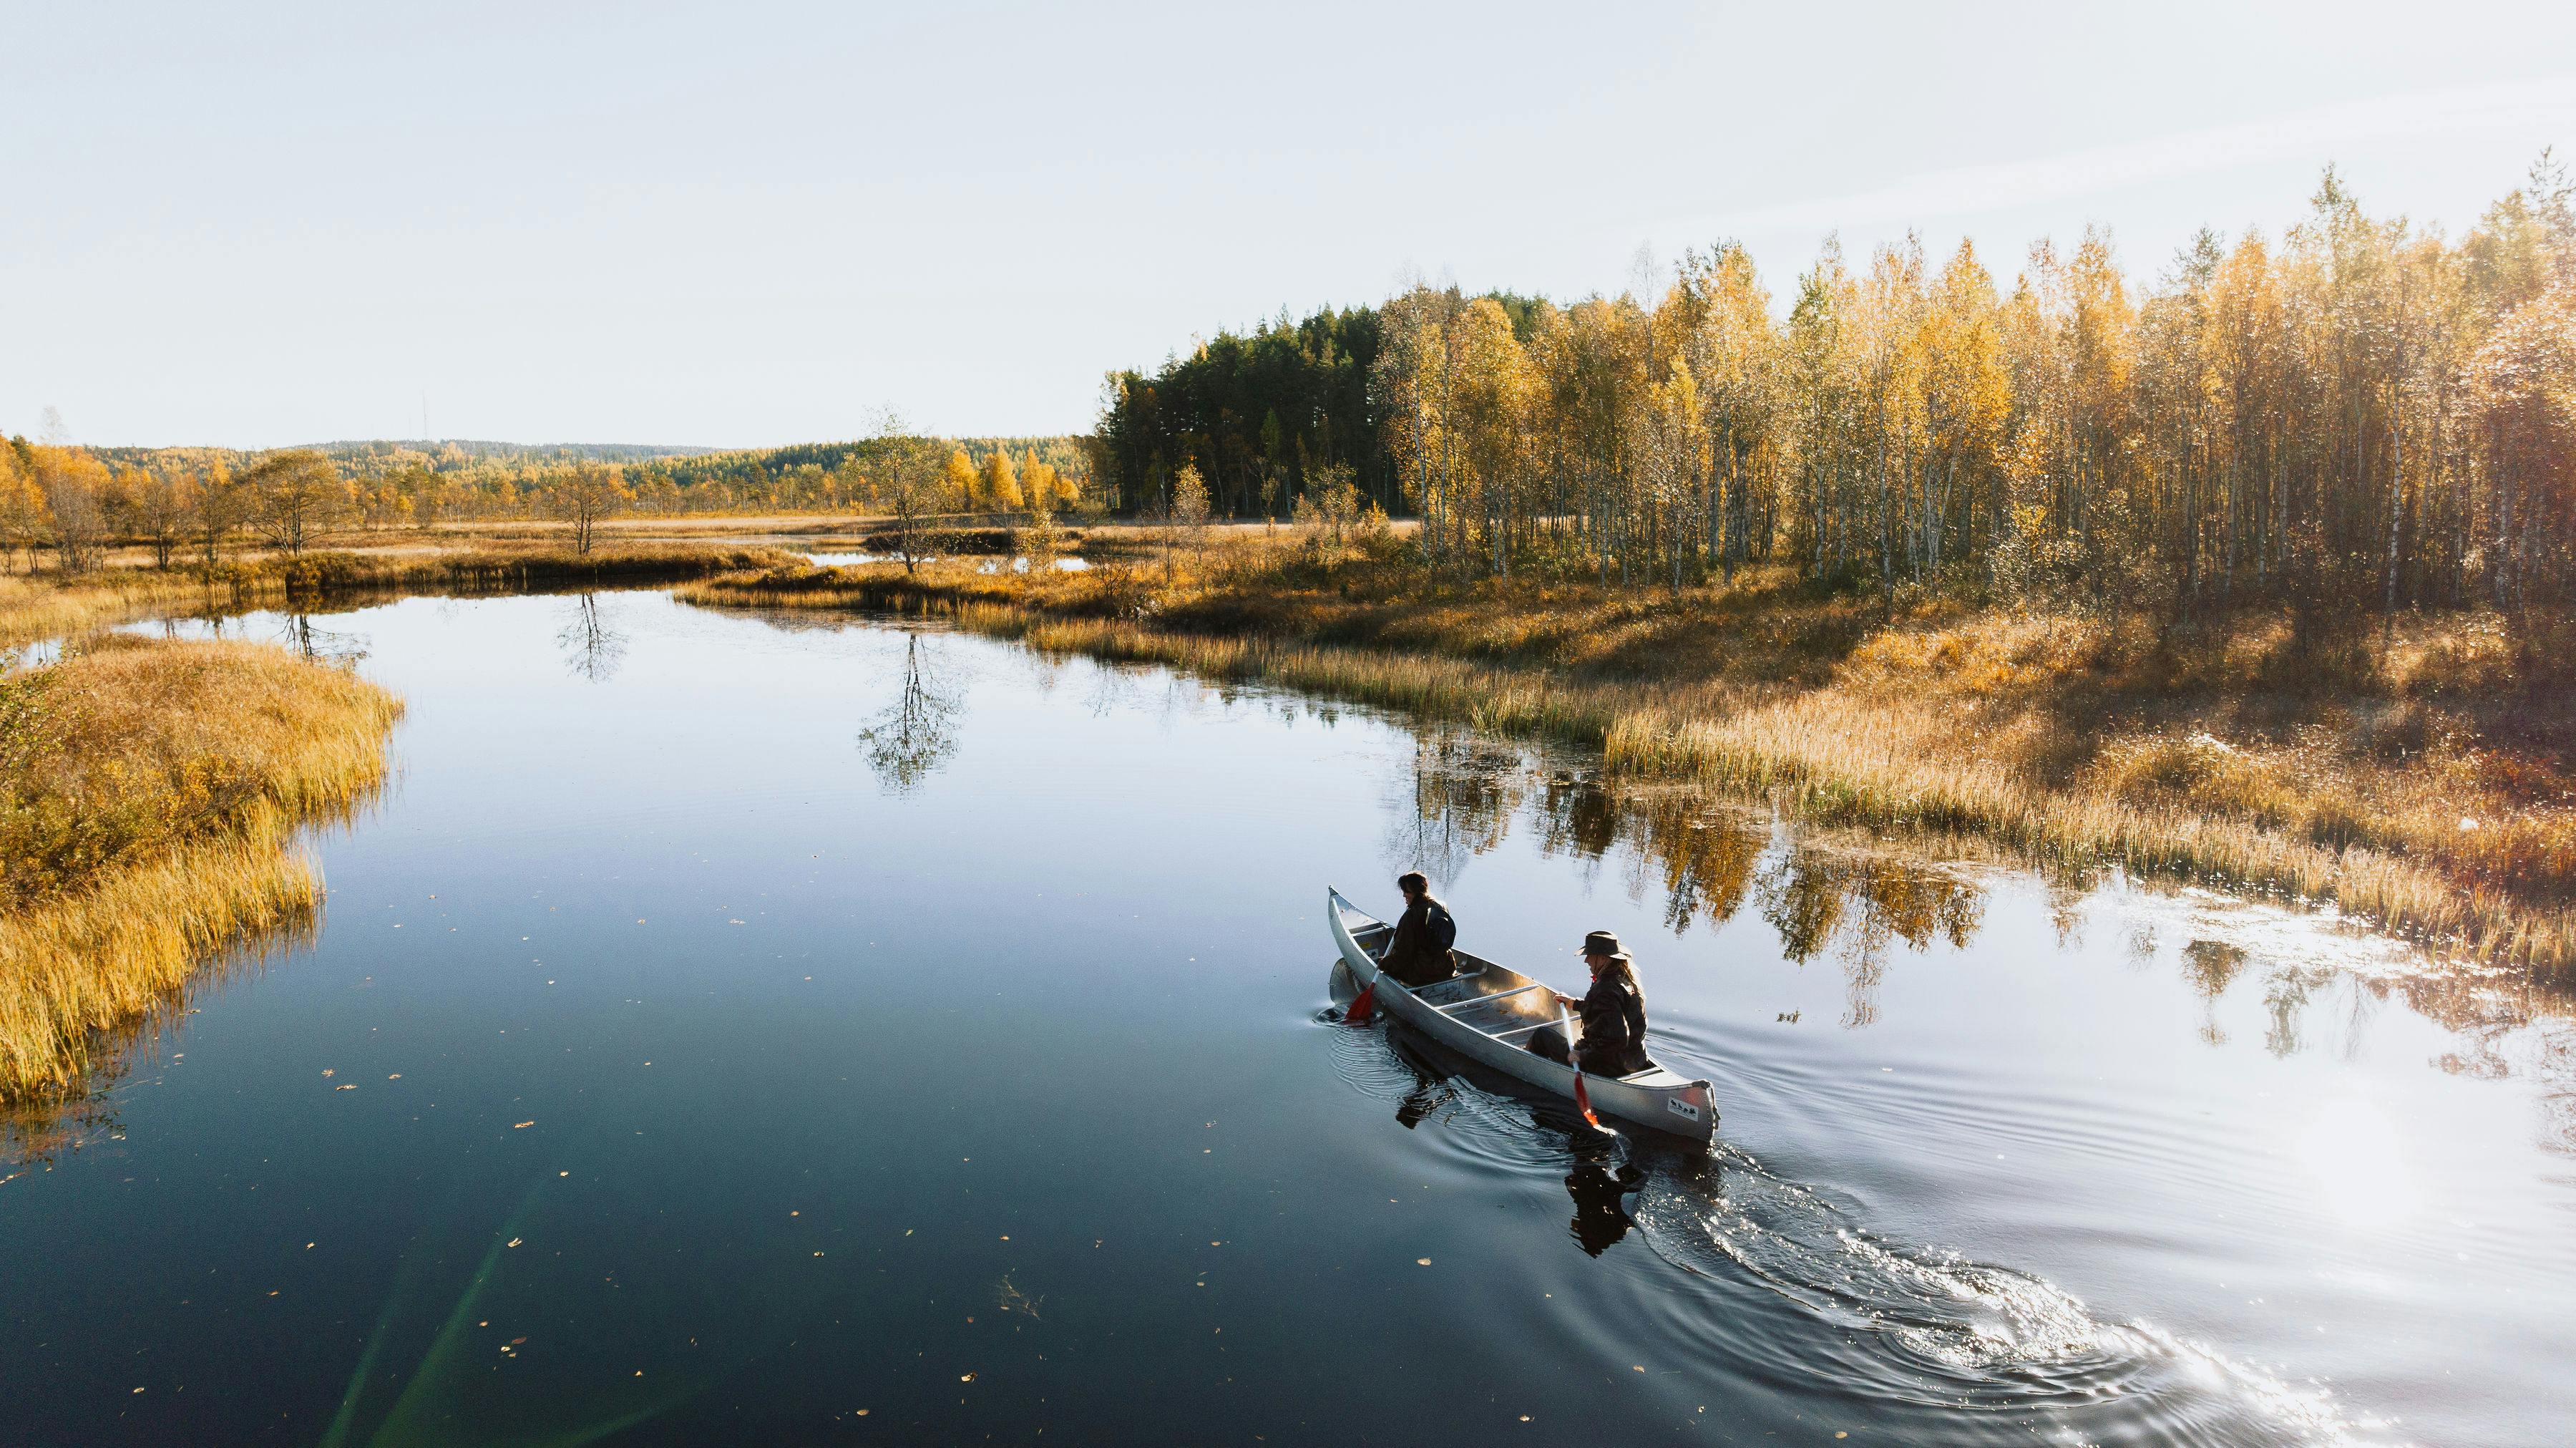 A couple enjoying the calm and pristine nature while canoeing on mirror-like water.